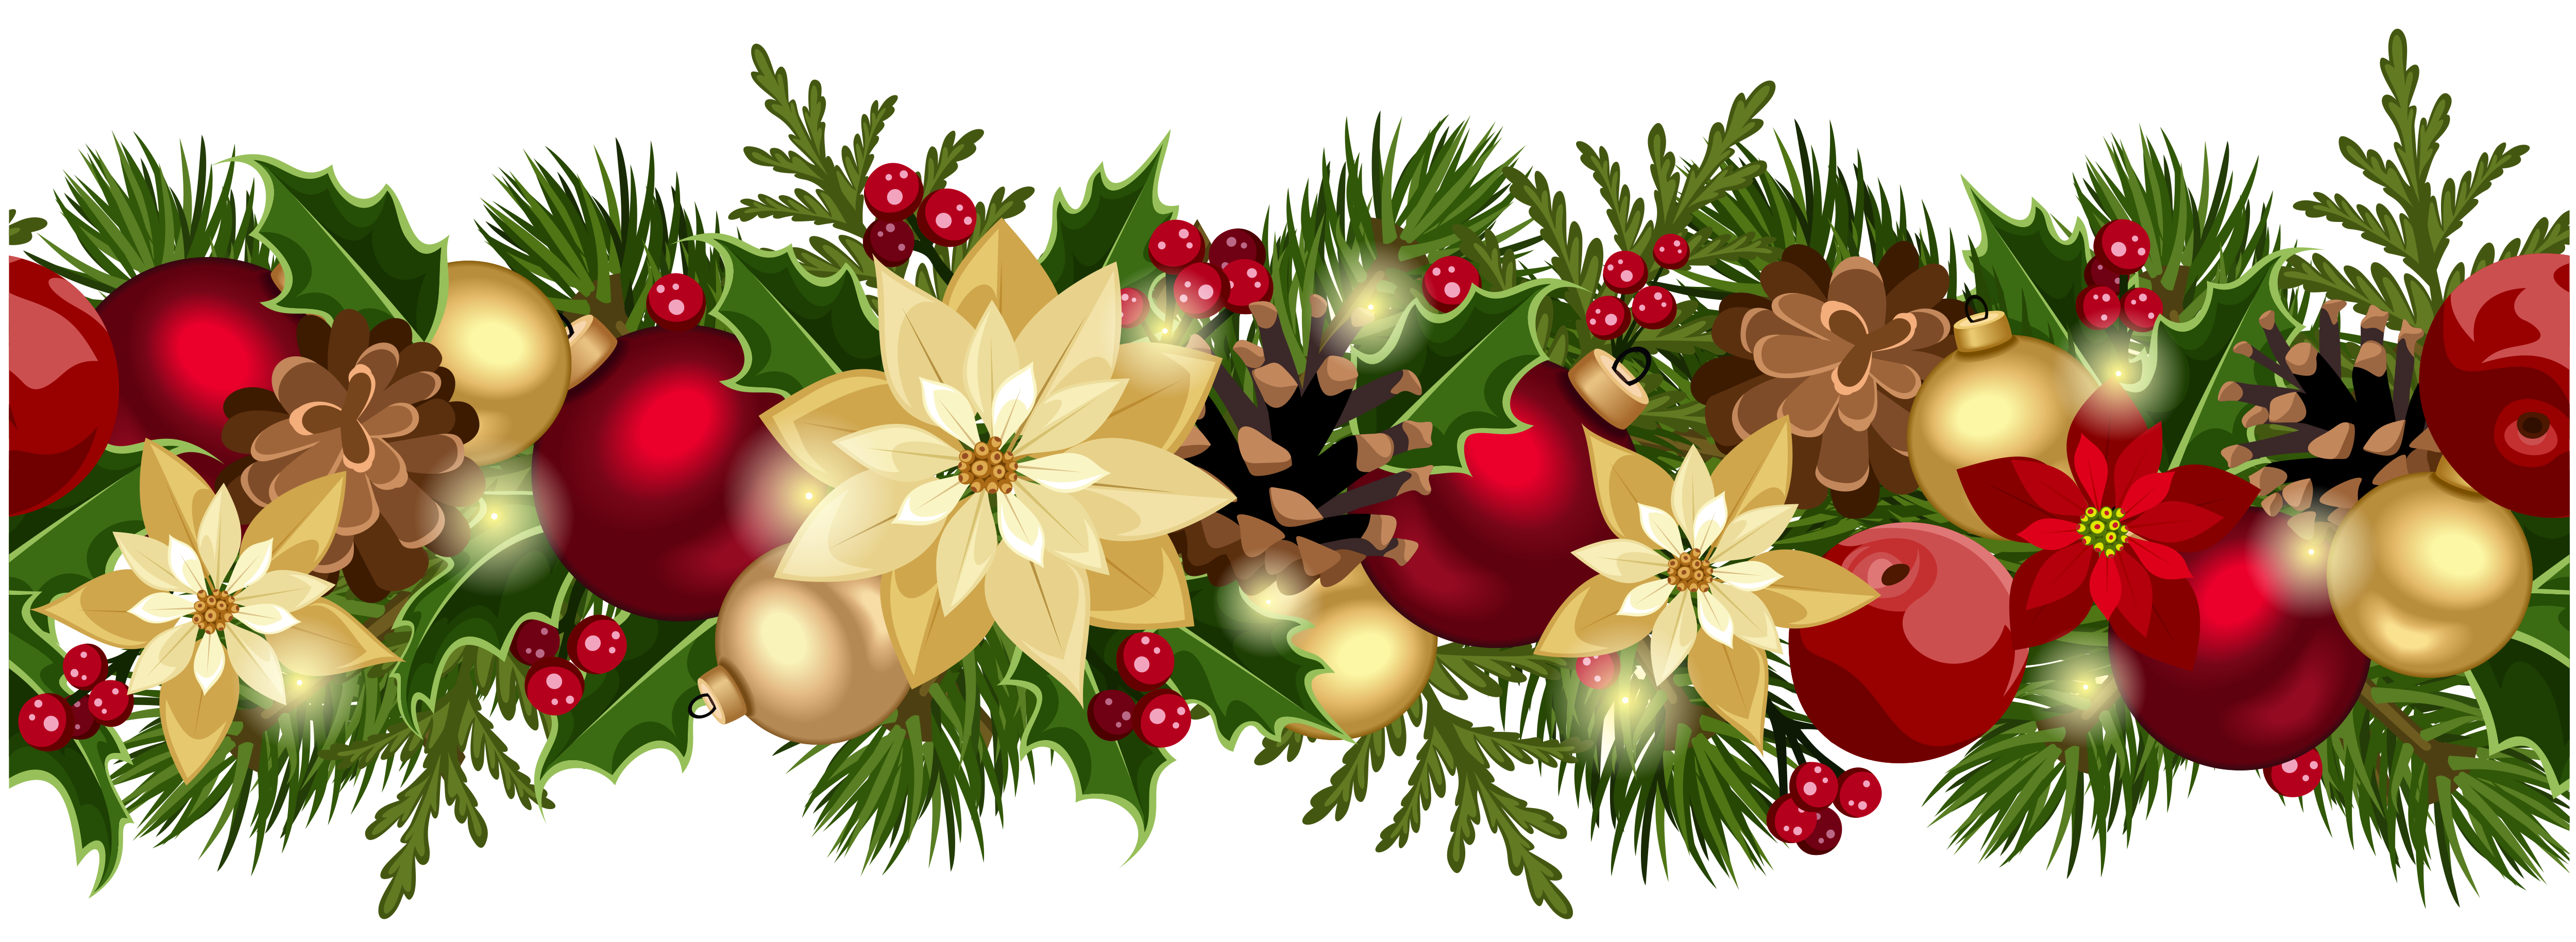 Decorative garland clipart picture. Christmas ornament border png